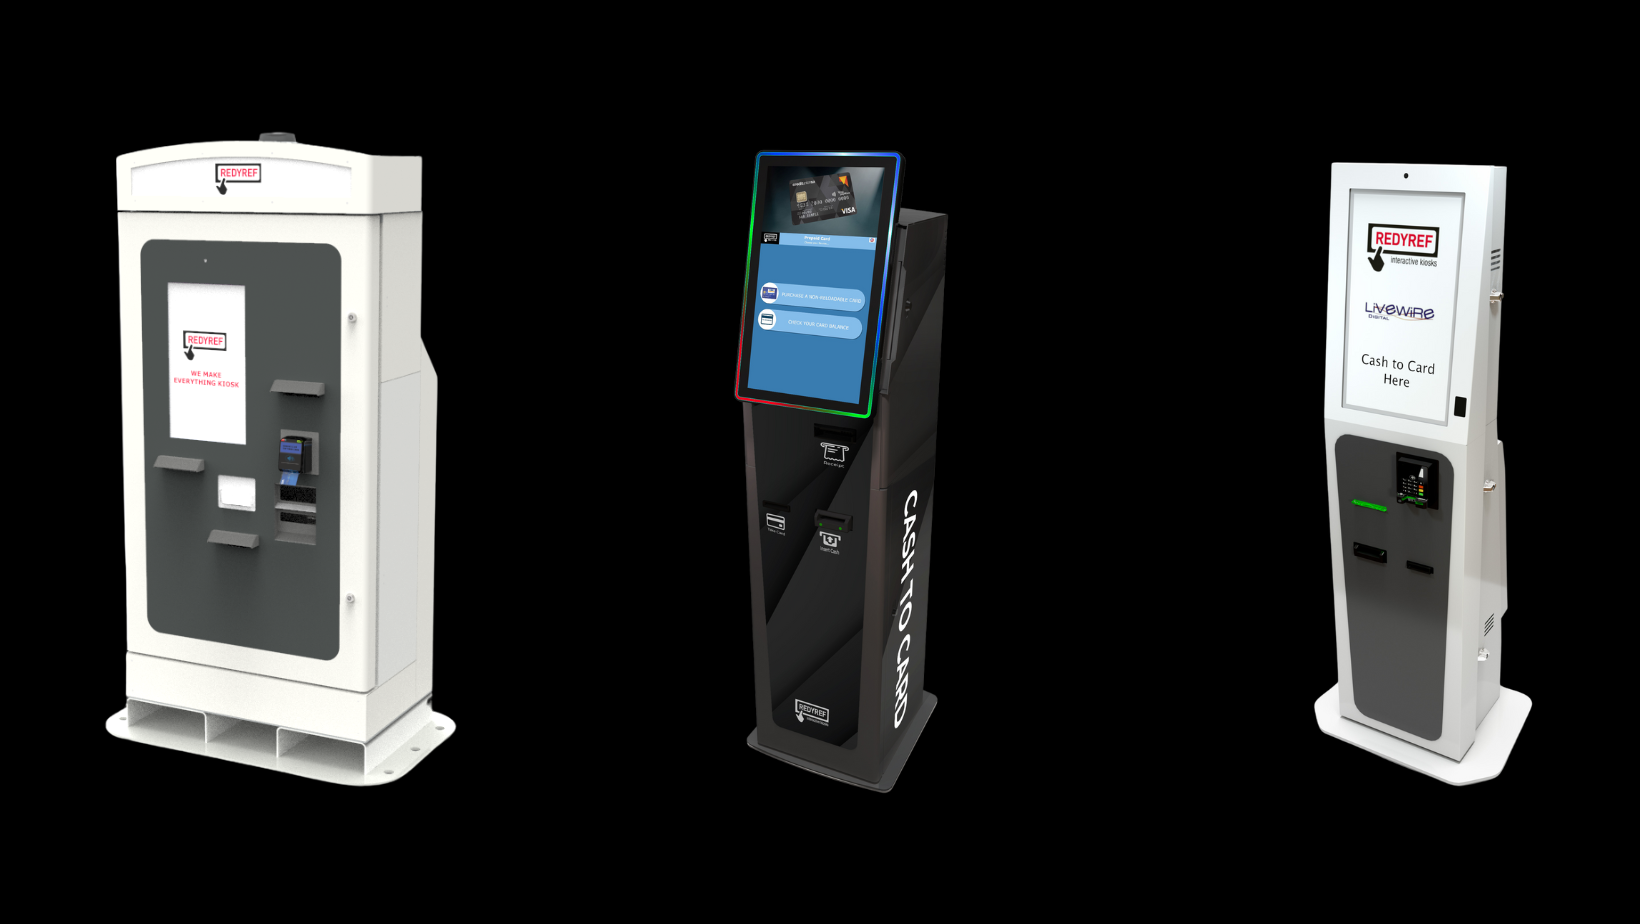 Escape, Encounter and Hoback Cash-to-Card Kiosk Solutions by REDYREF